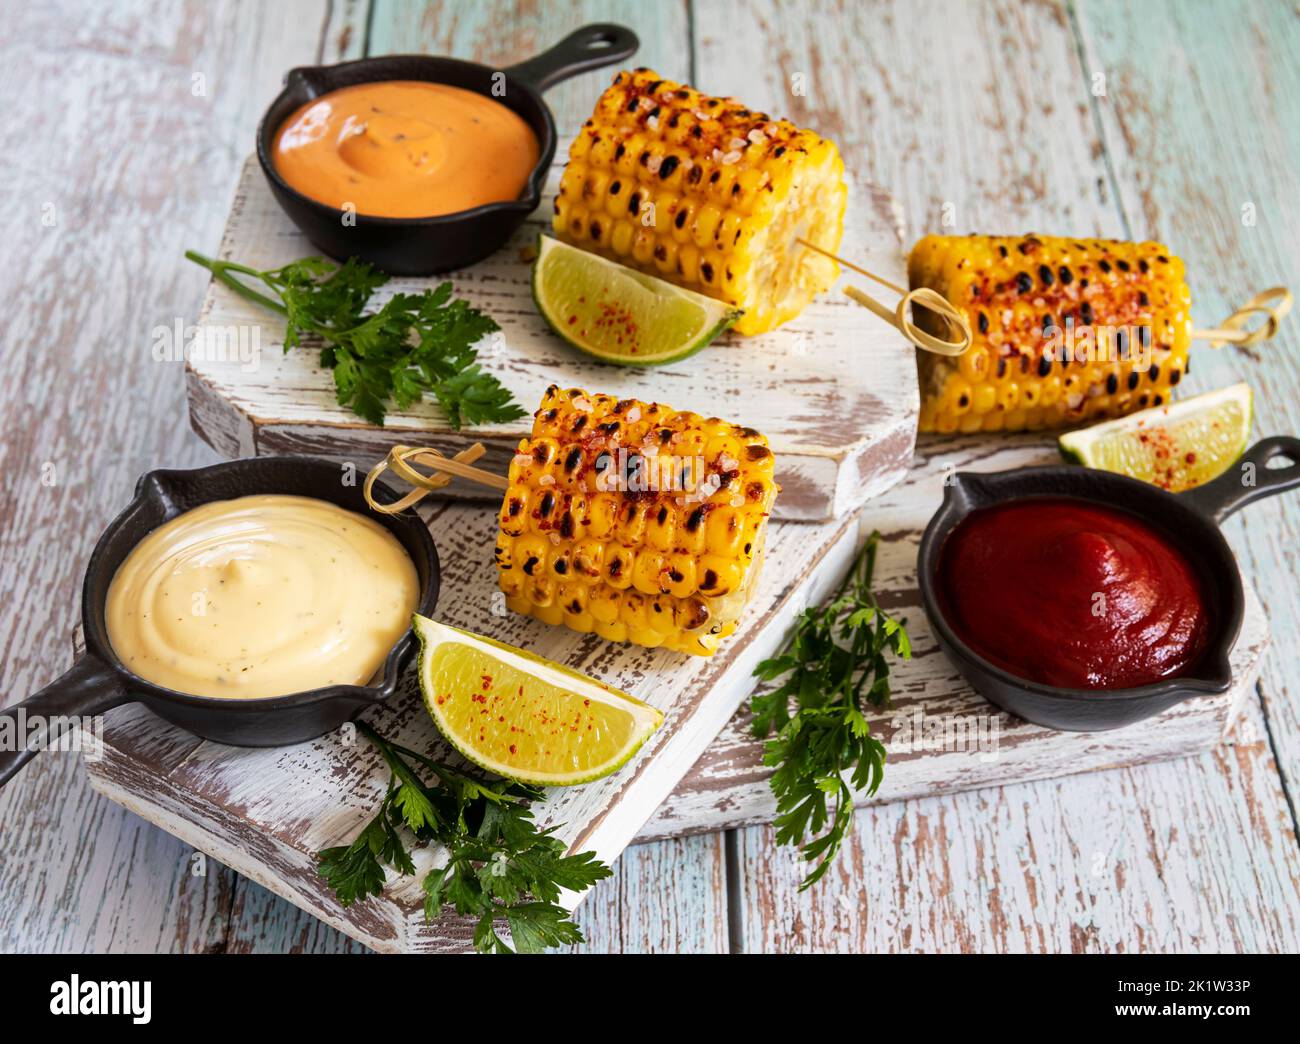 grilled yellow head corn with spices lime with white red orange sauce portion Stock Photo